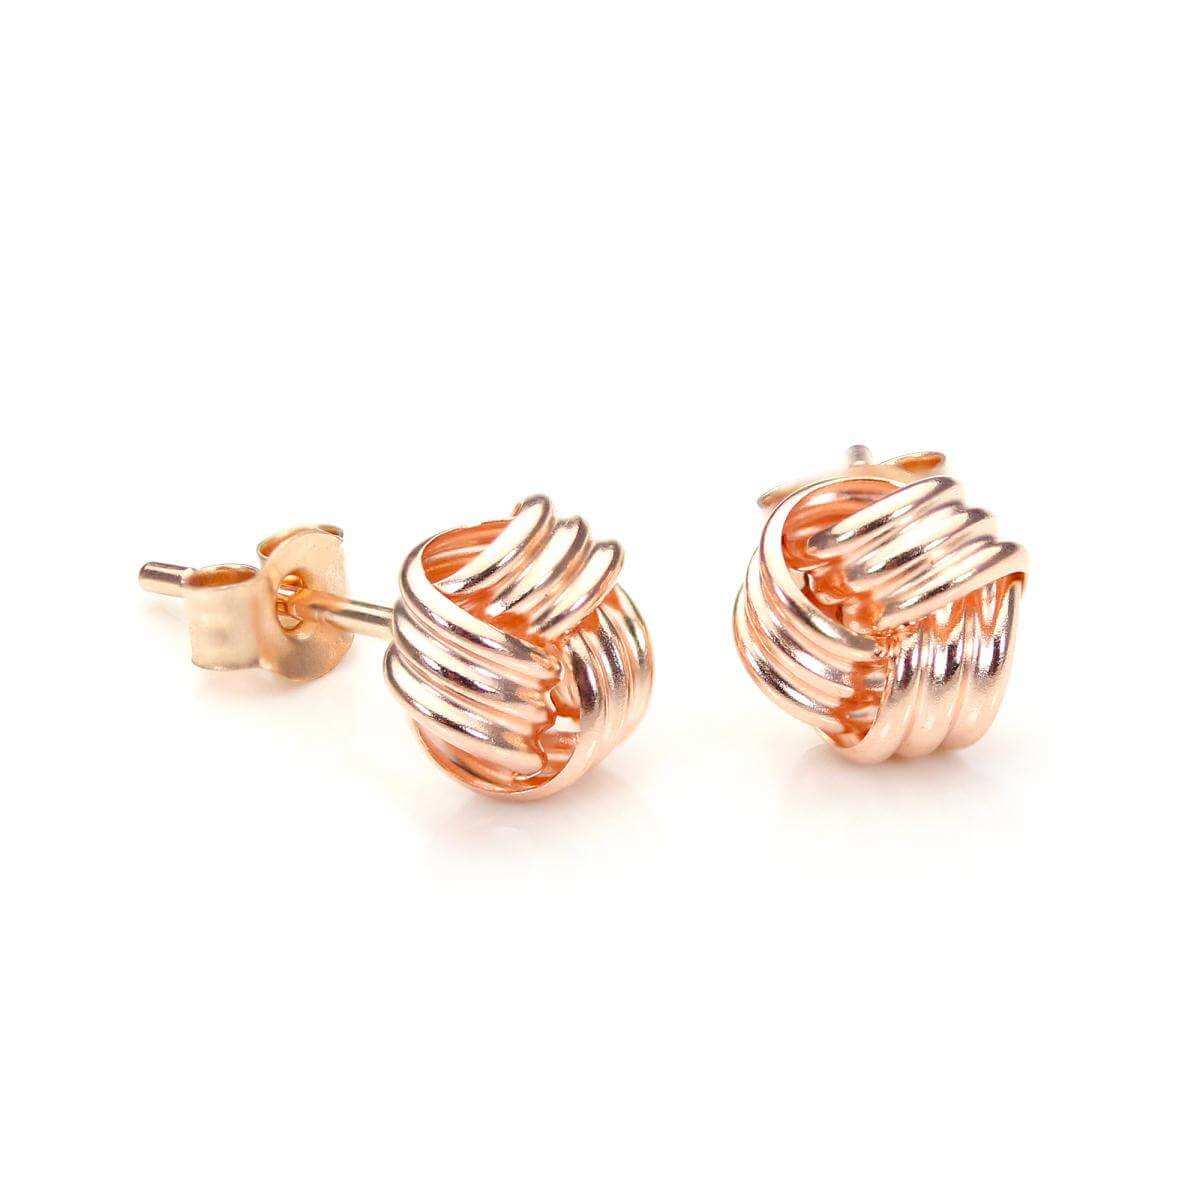 9ct Rose Gold 6mm Knot Stud Earrings